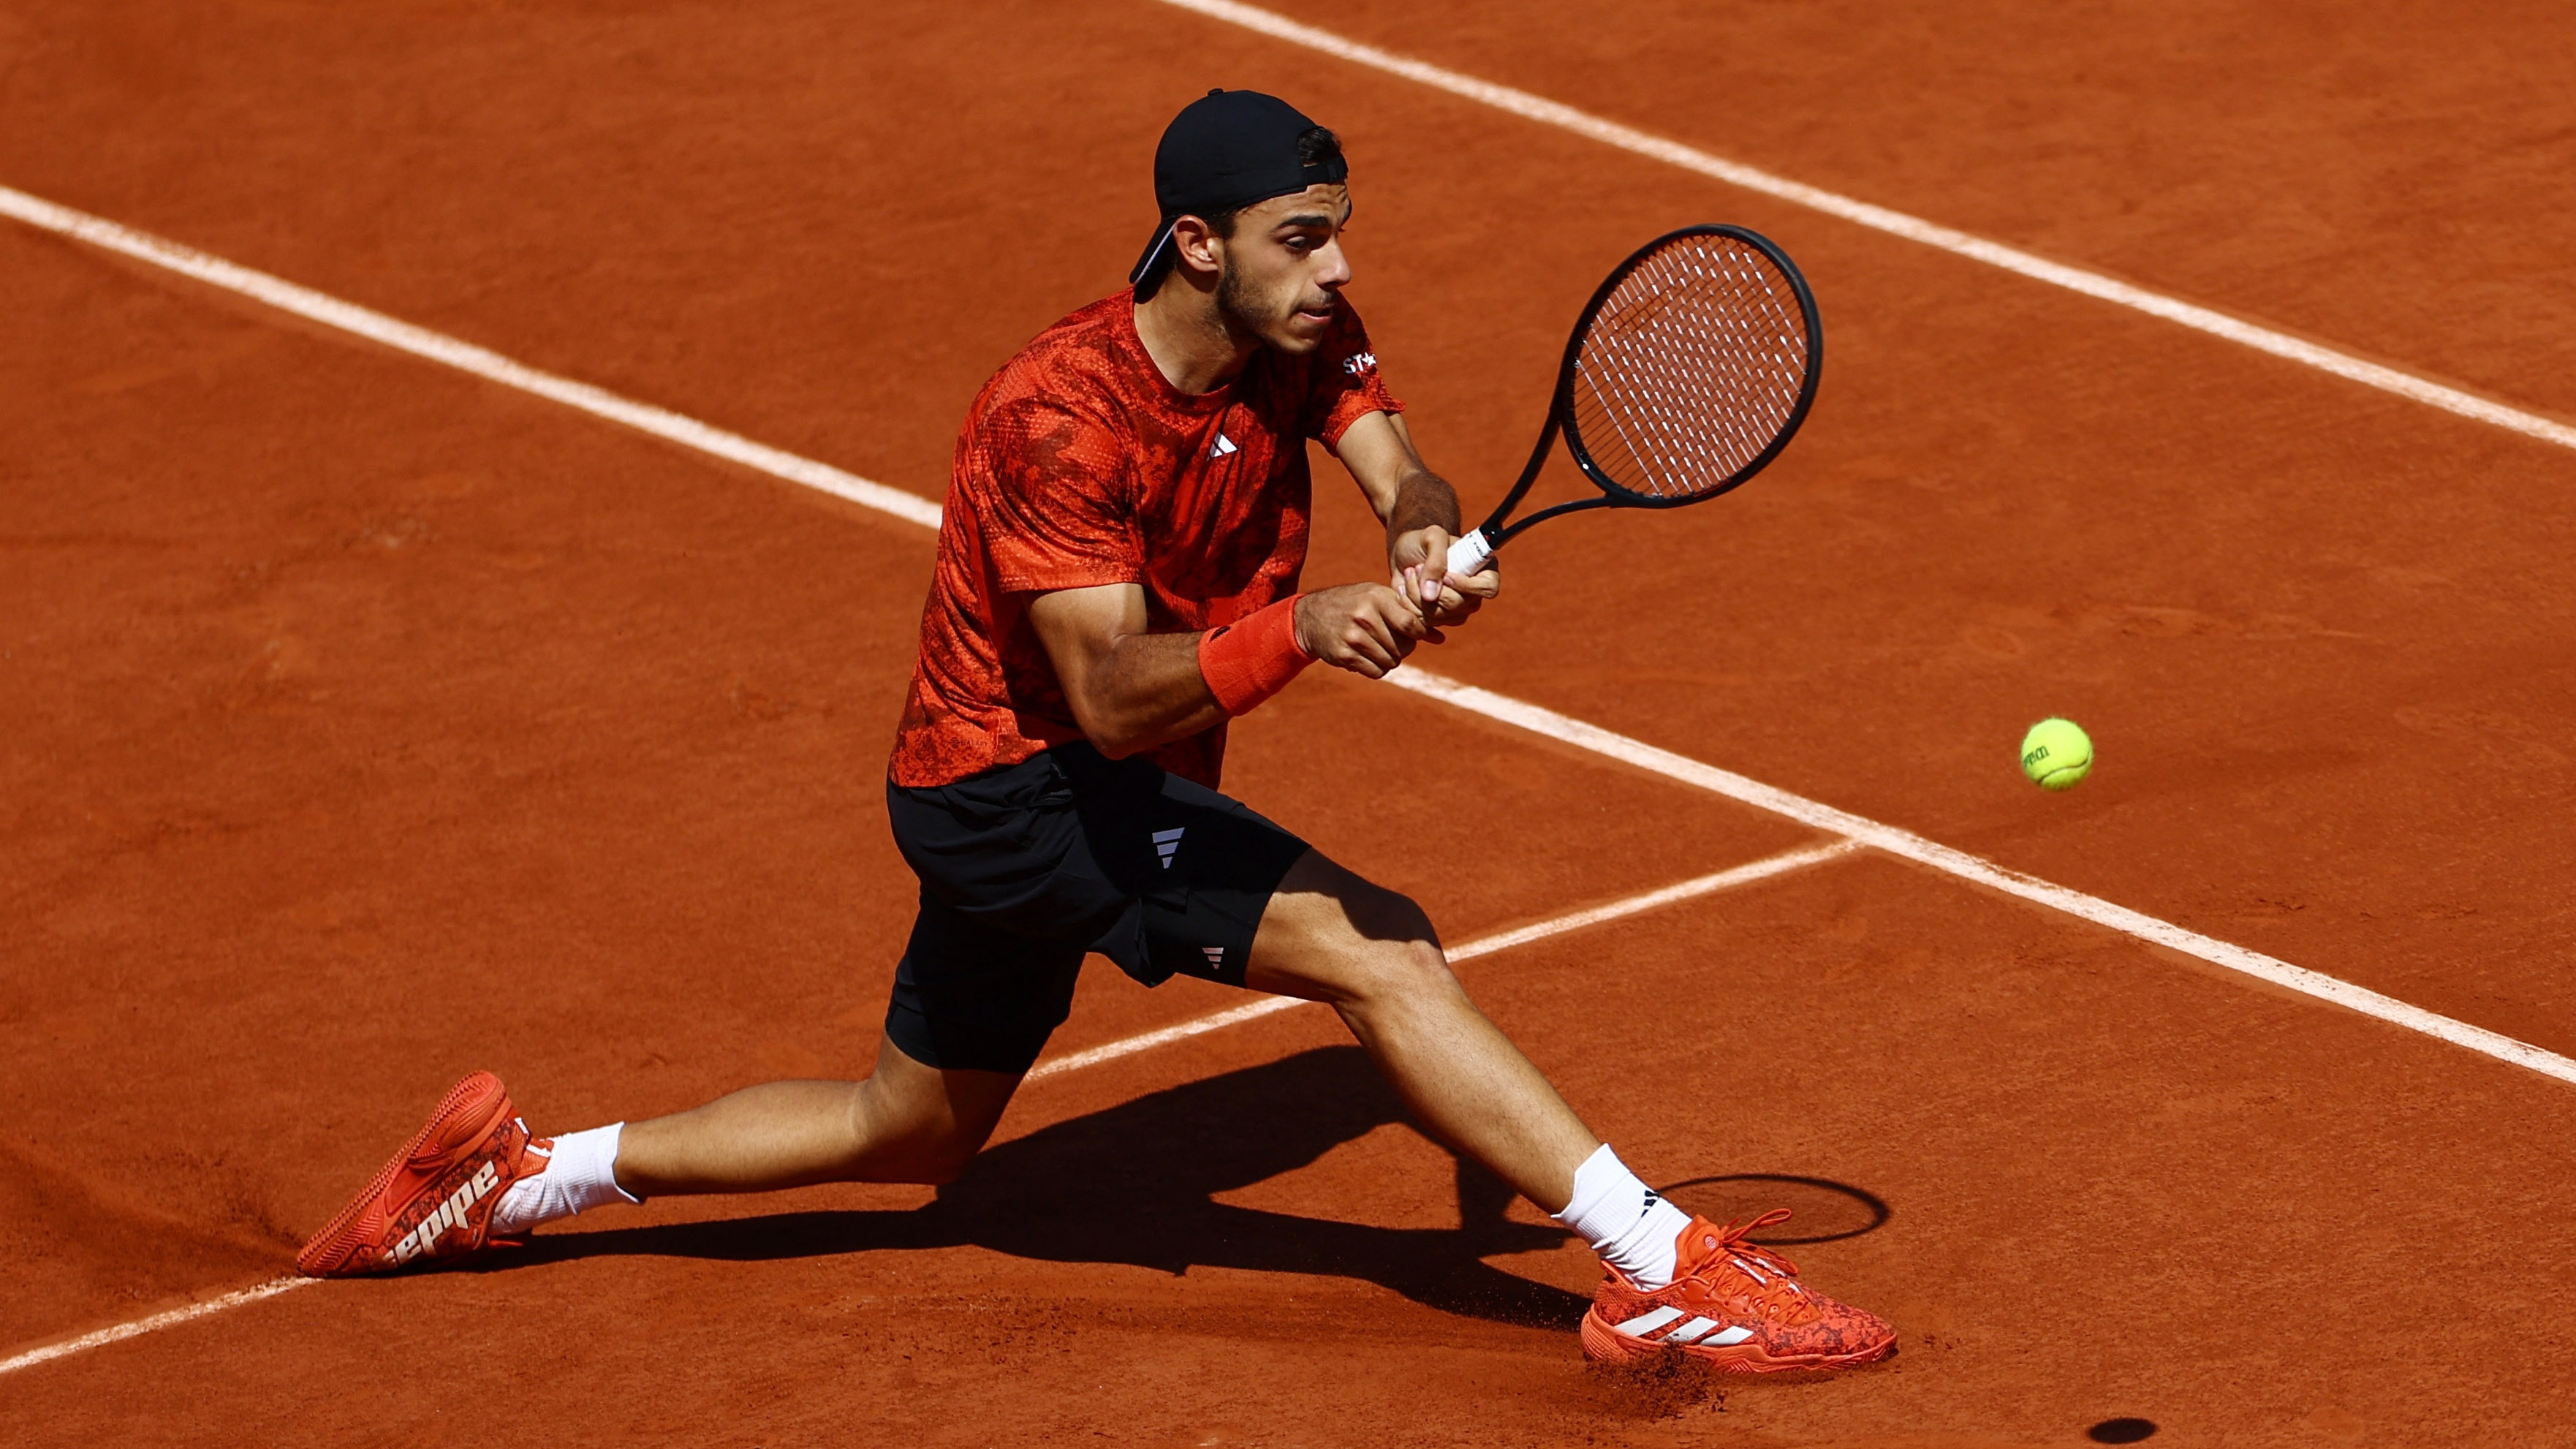 Tennis - French Open - Roland Garros, Paris, France - June 5, 2023 Argentina's Francisco Cerundolo in action during his fourth round match against Denmark's Holger Rune REUTERS/Lisi Niesner